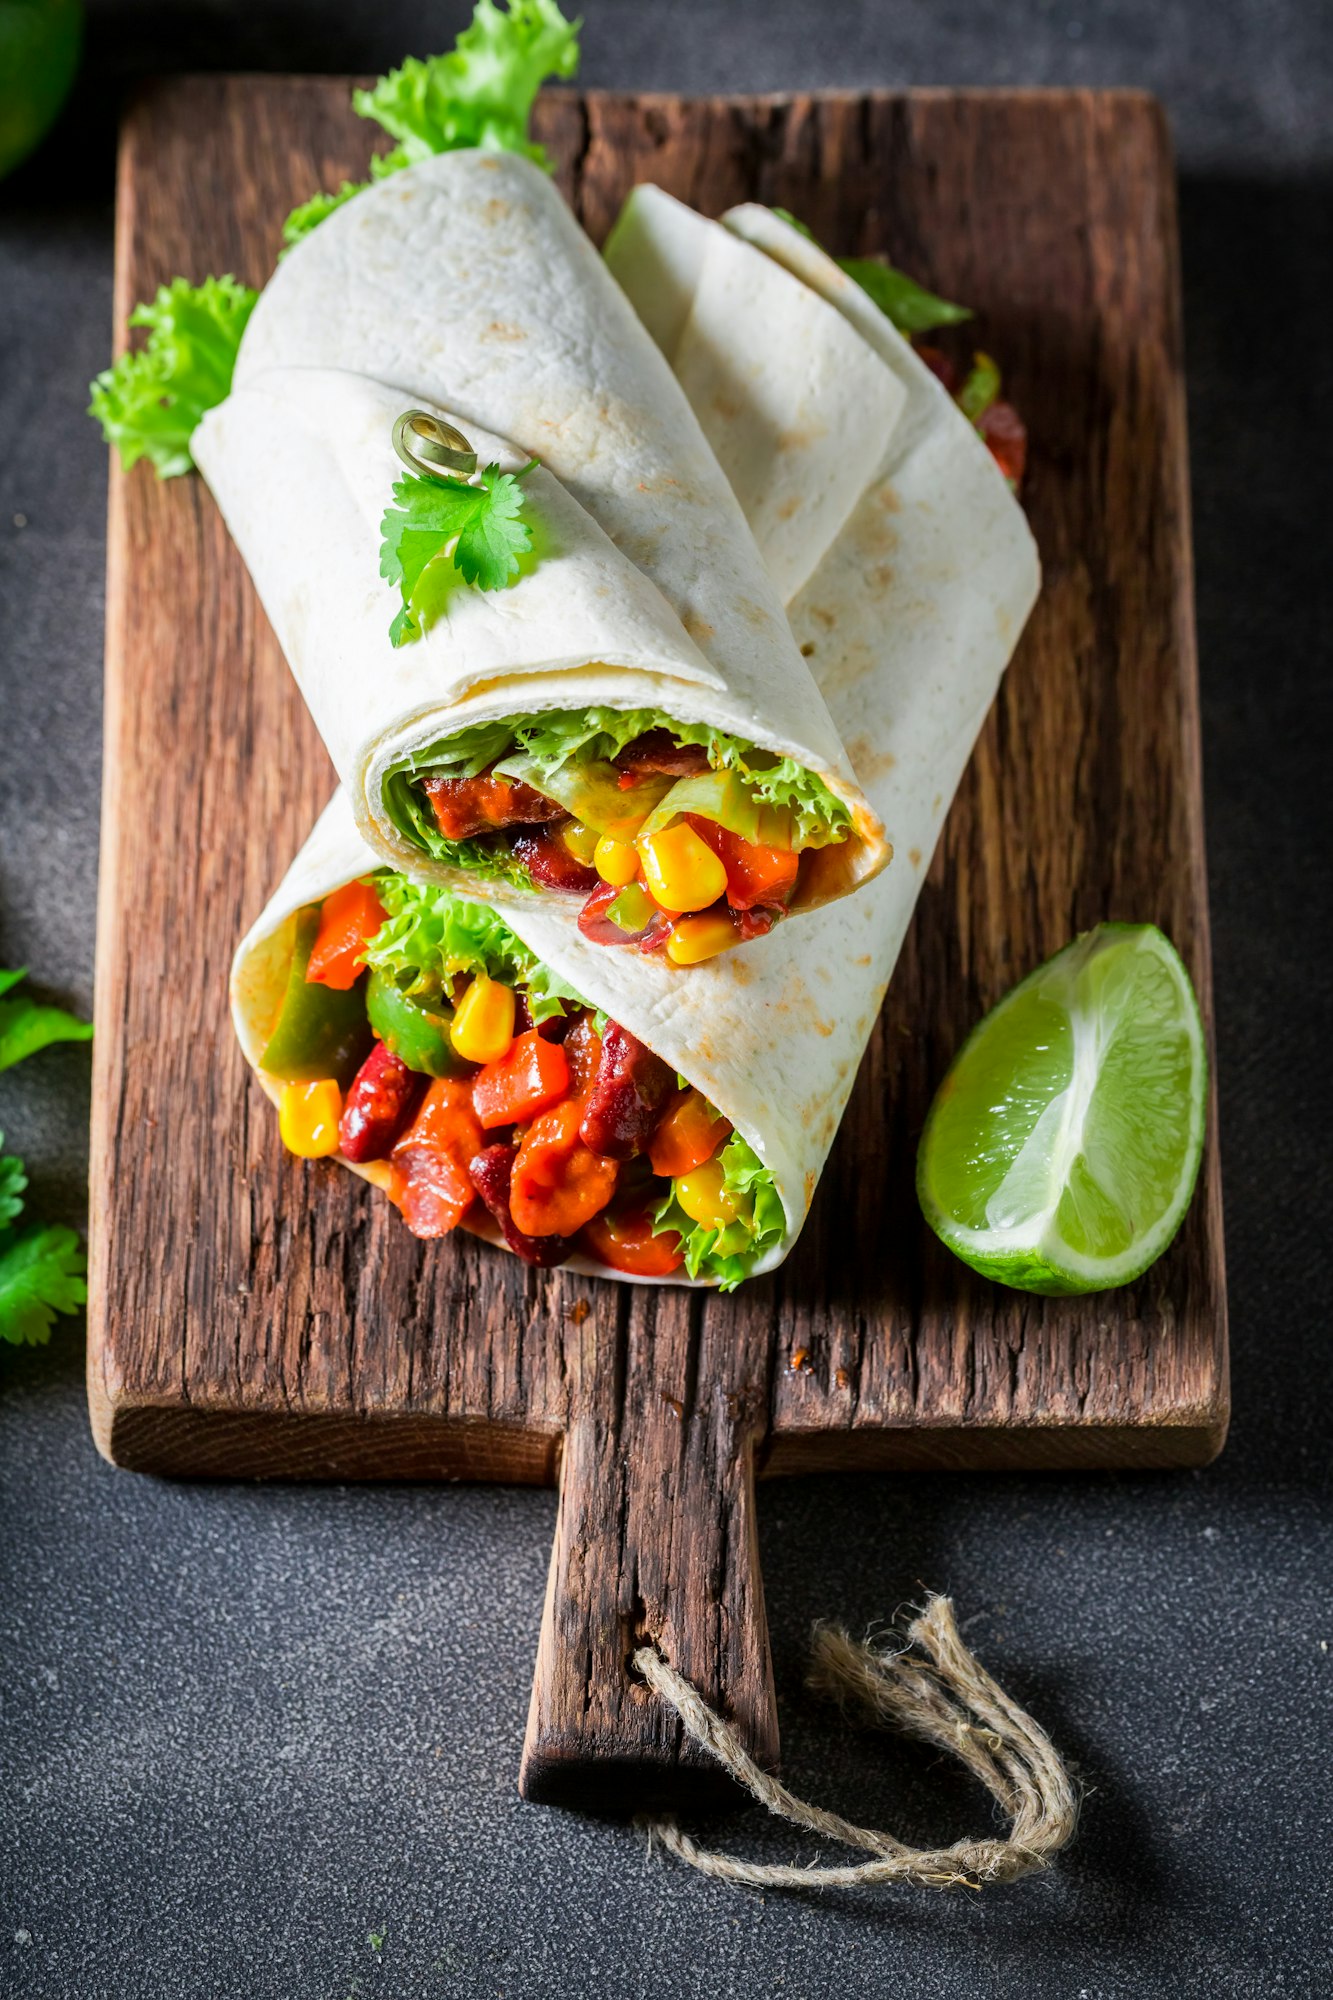 Top view of tasty burrito made of lettuce and vegetables